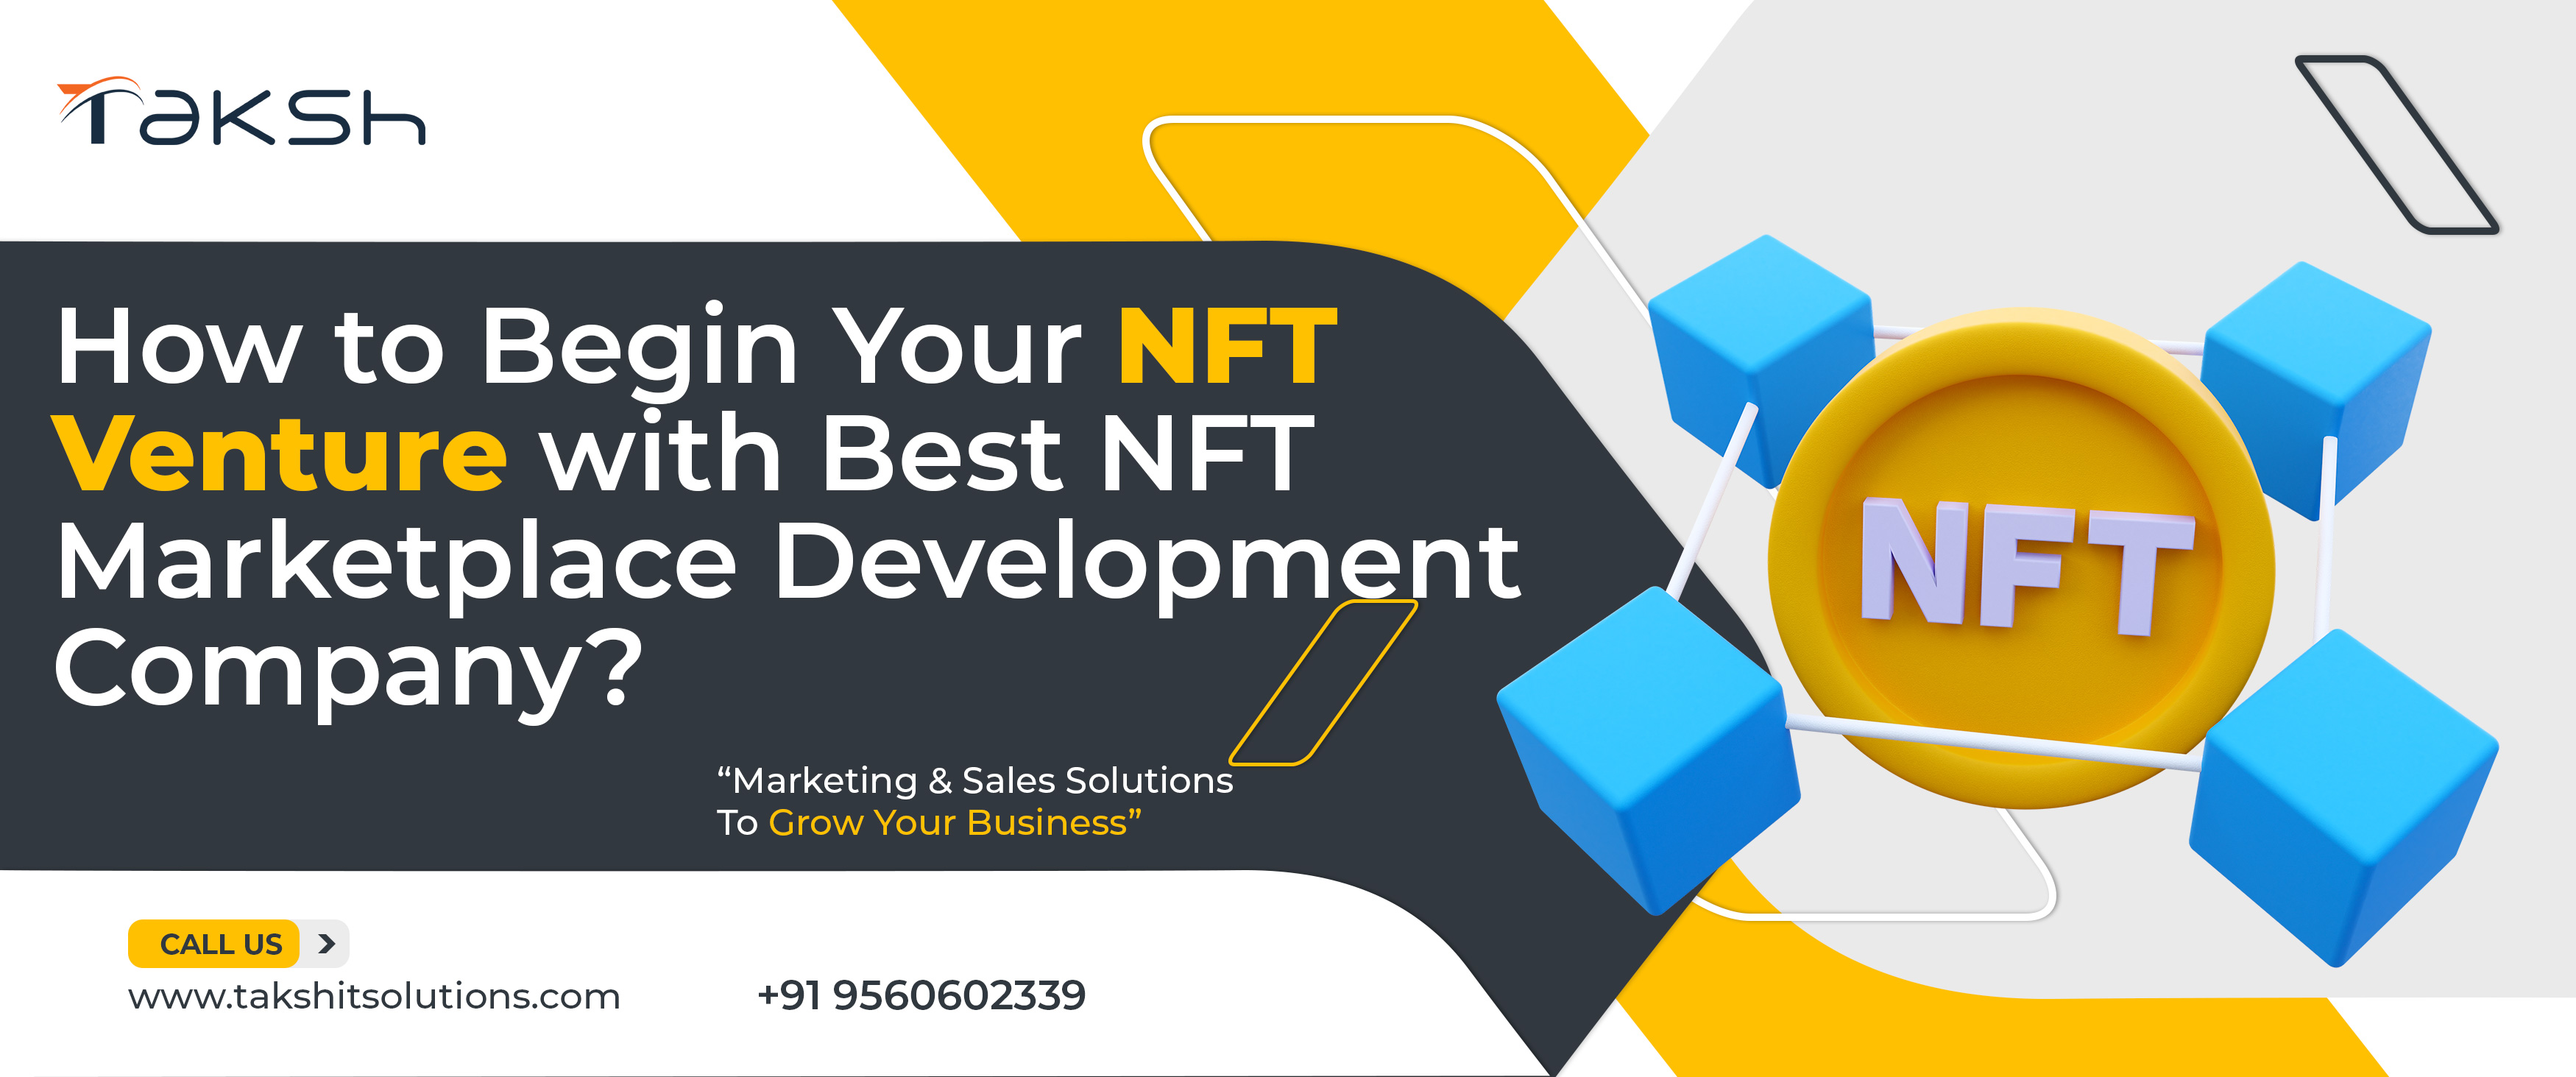 How to Begin Your NFT Venture with Best NFT Marketplace Development Company? 